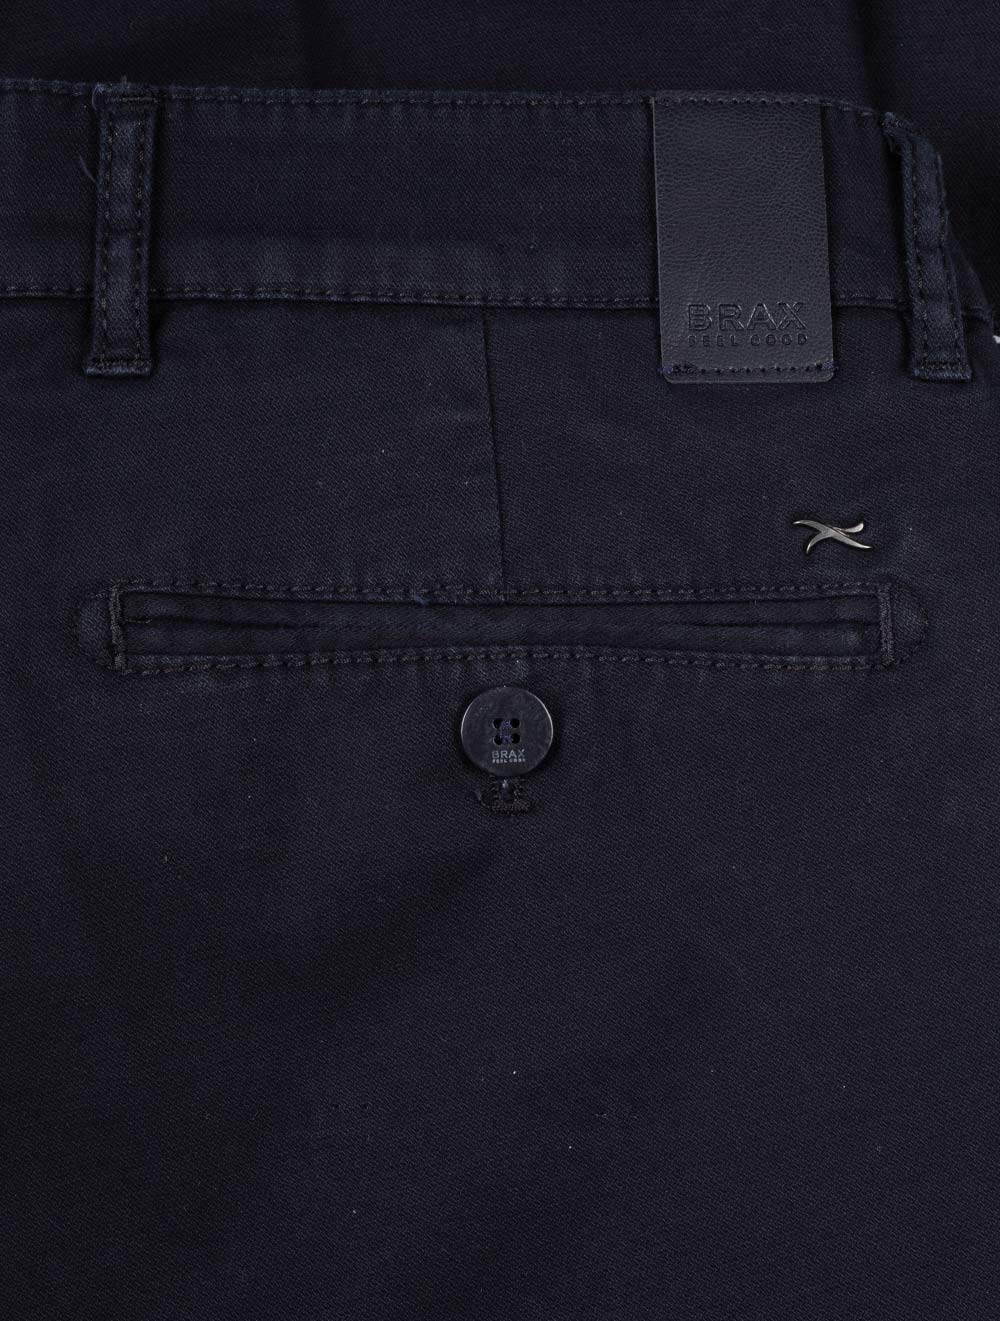 Everest Trousers Navy